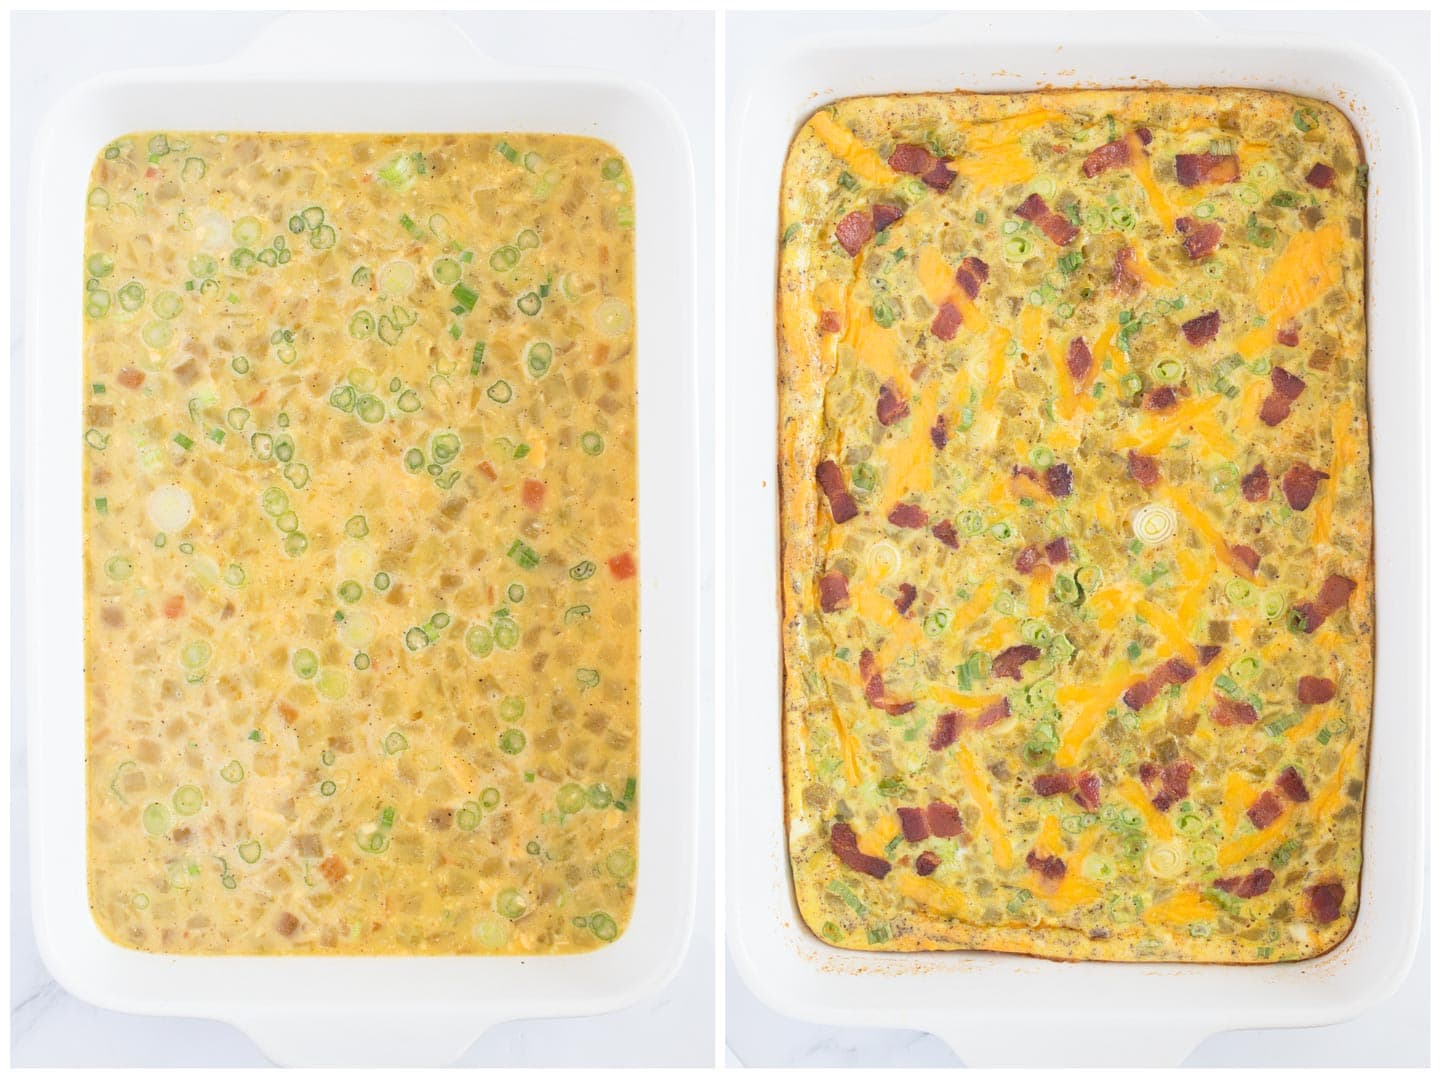 Before and after of southwest egg bake in baking dish.